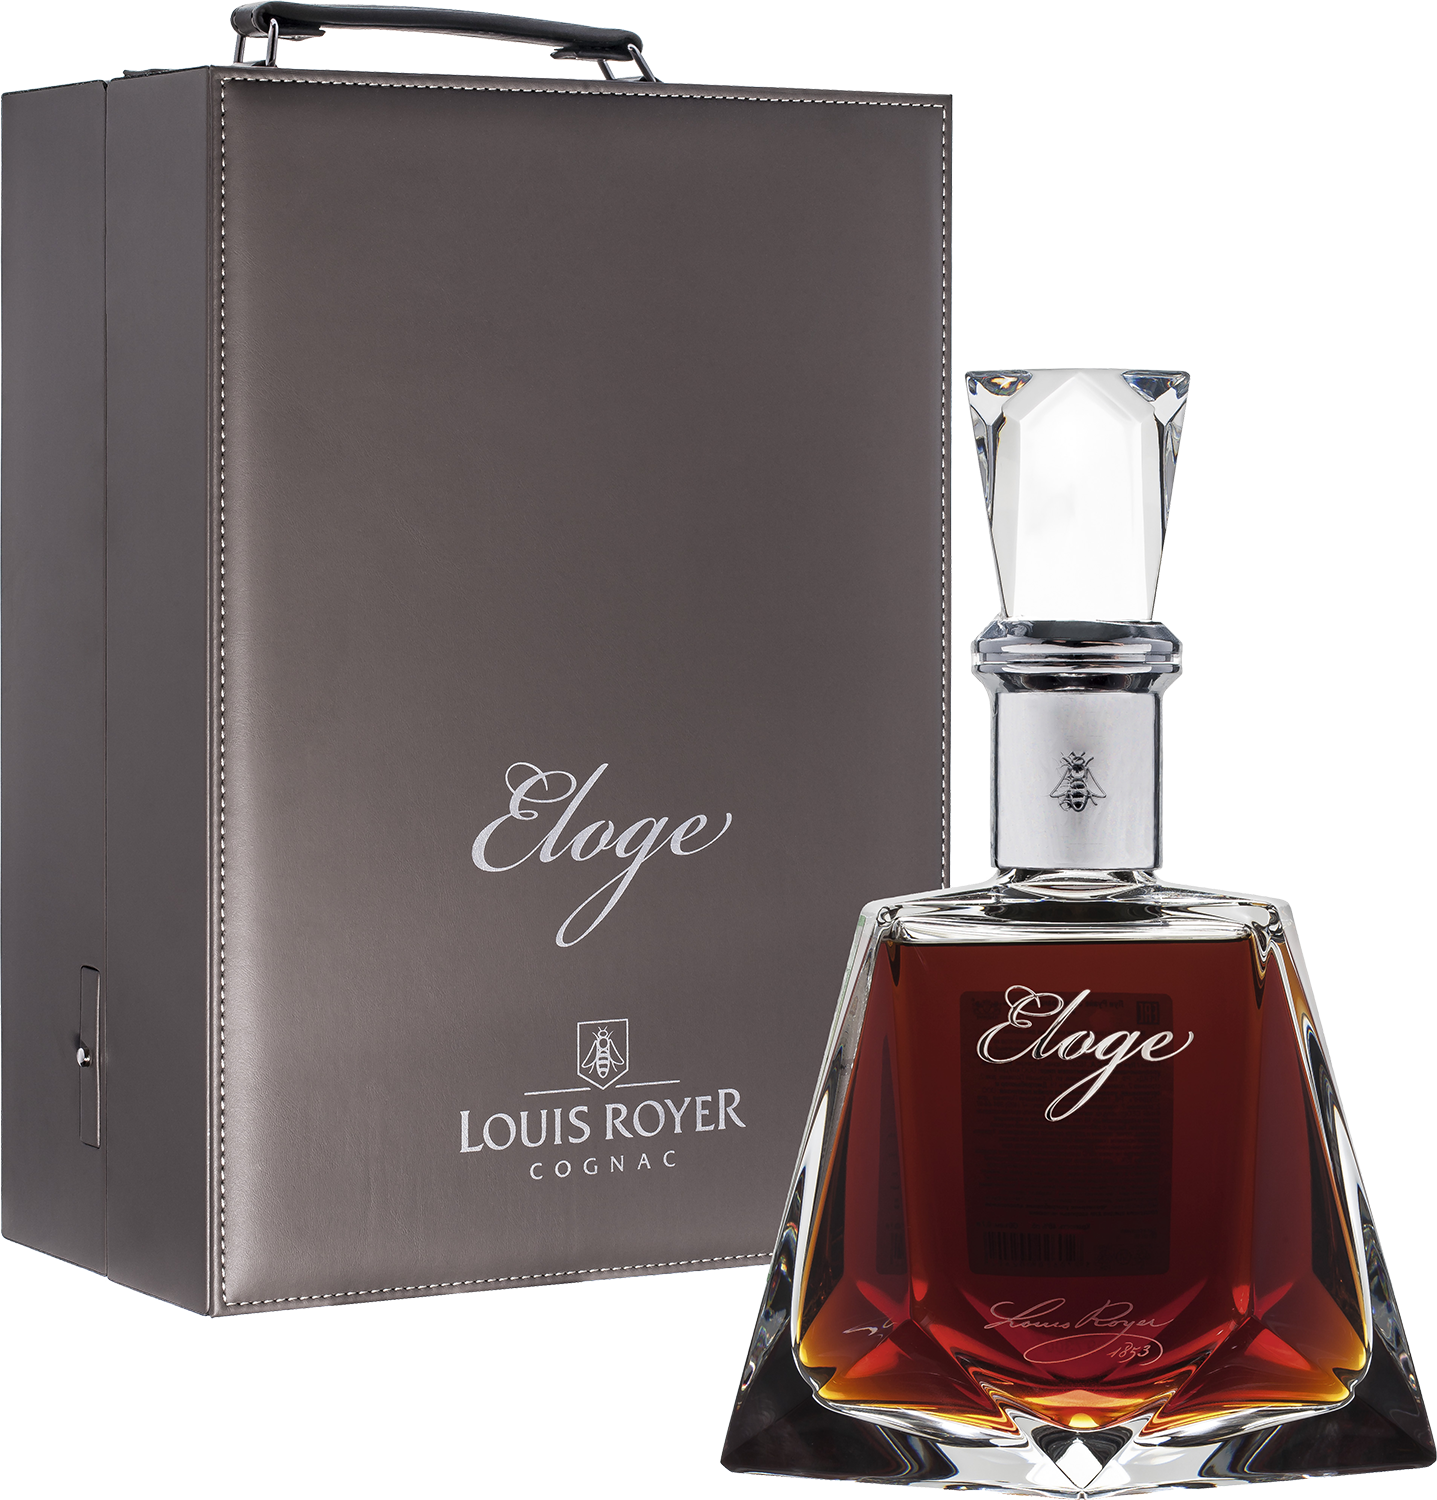 louis royer cognac grande champagne extra gift box Louis Royer Eloge Cognac Grande Champagne (gift box)